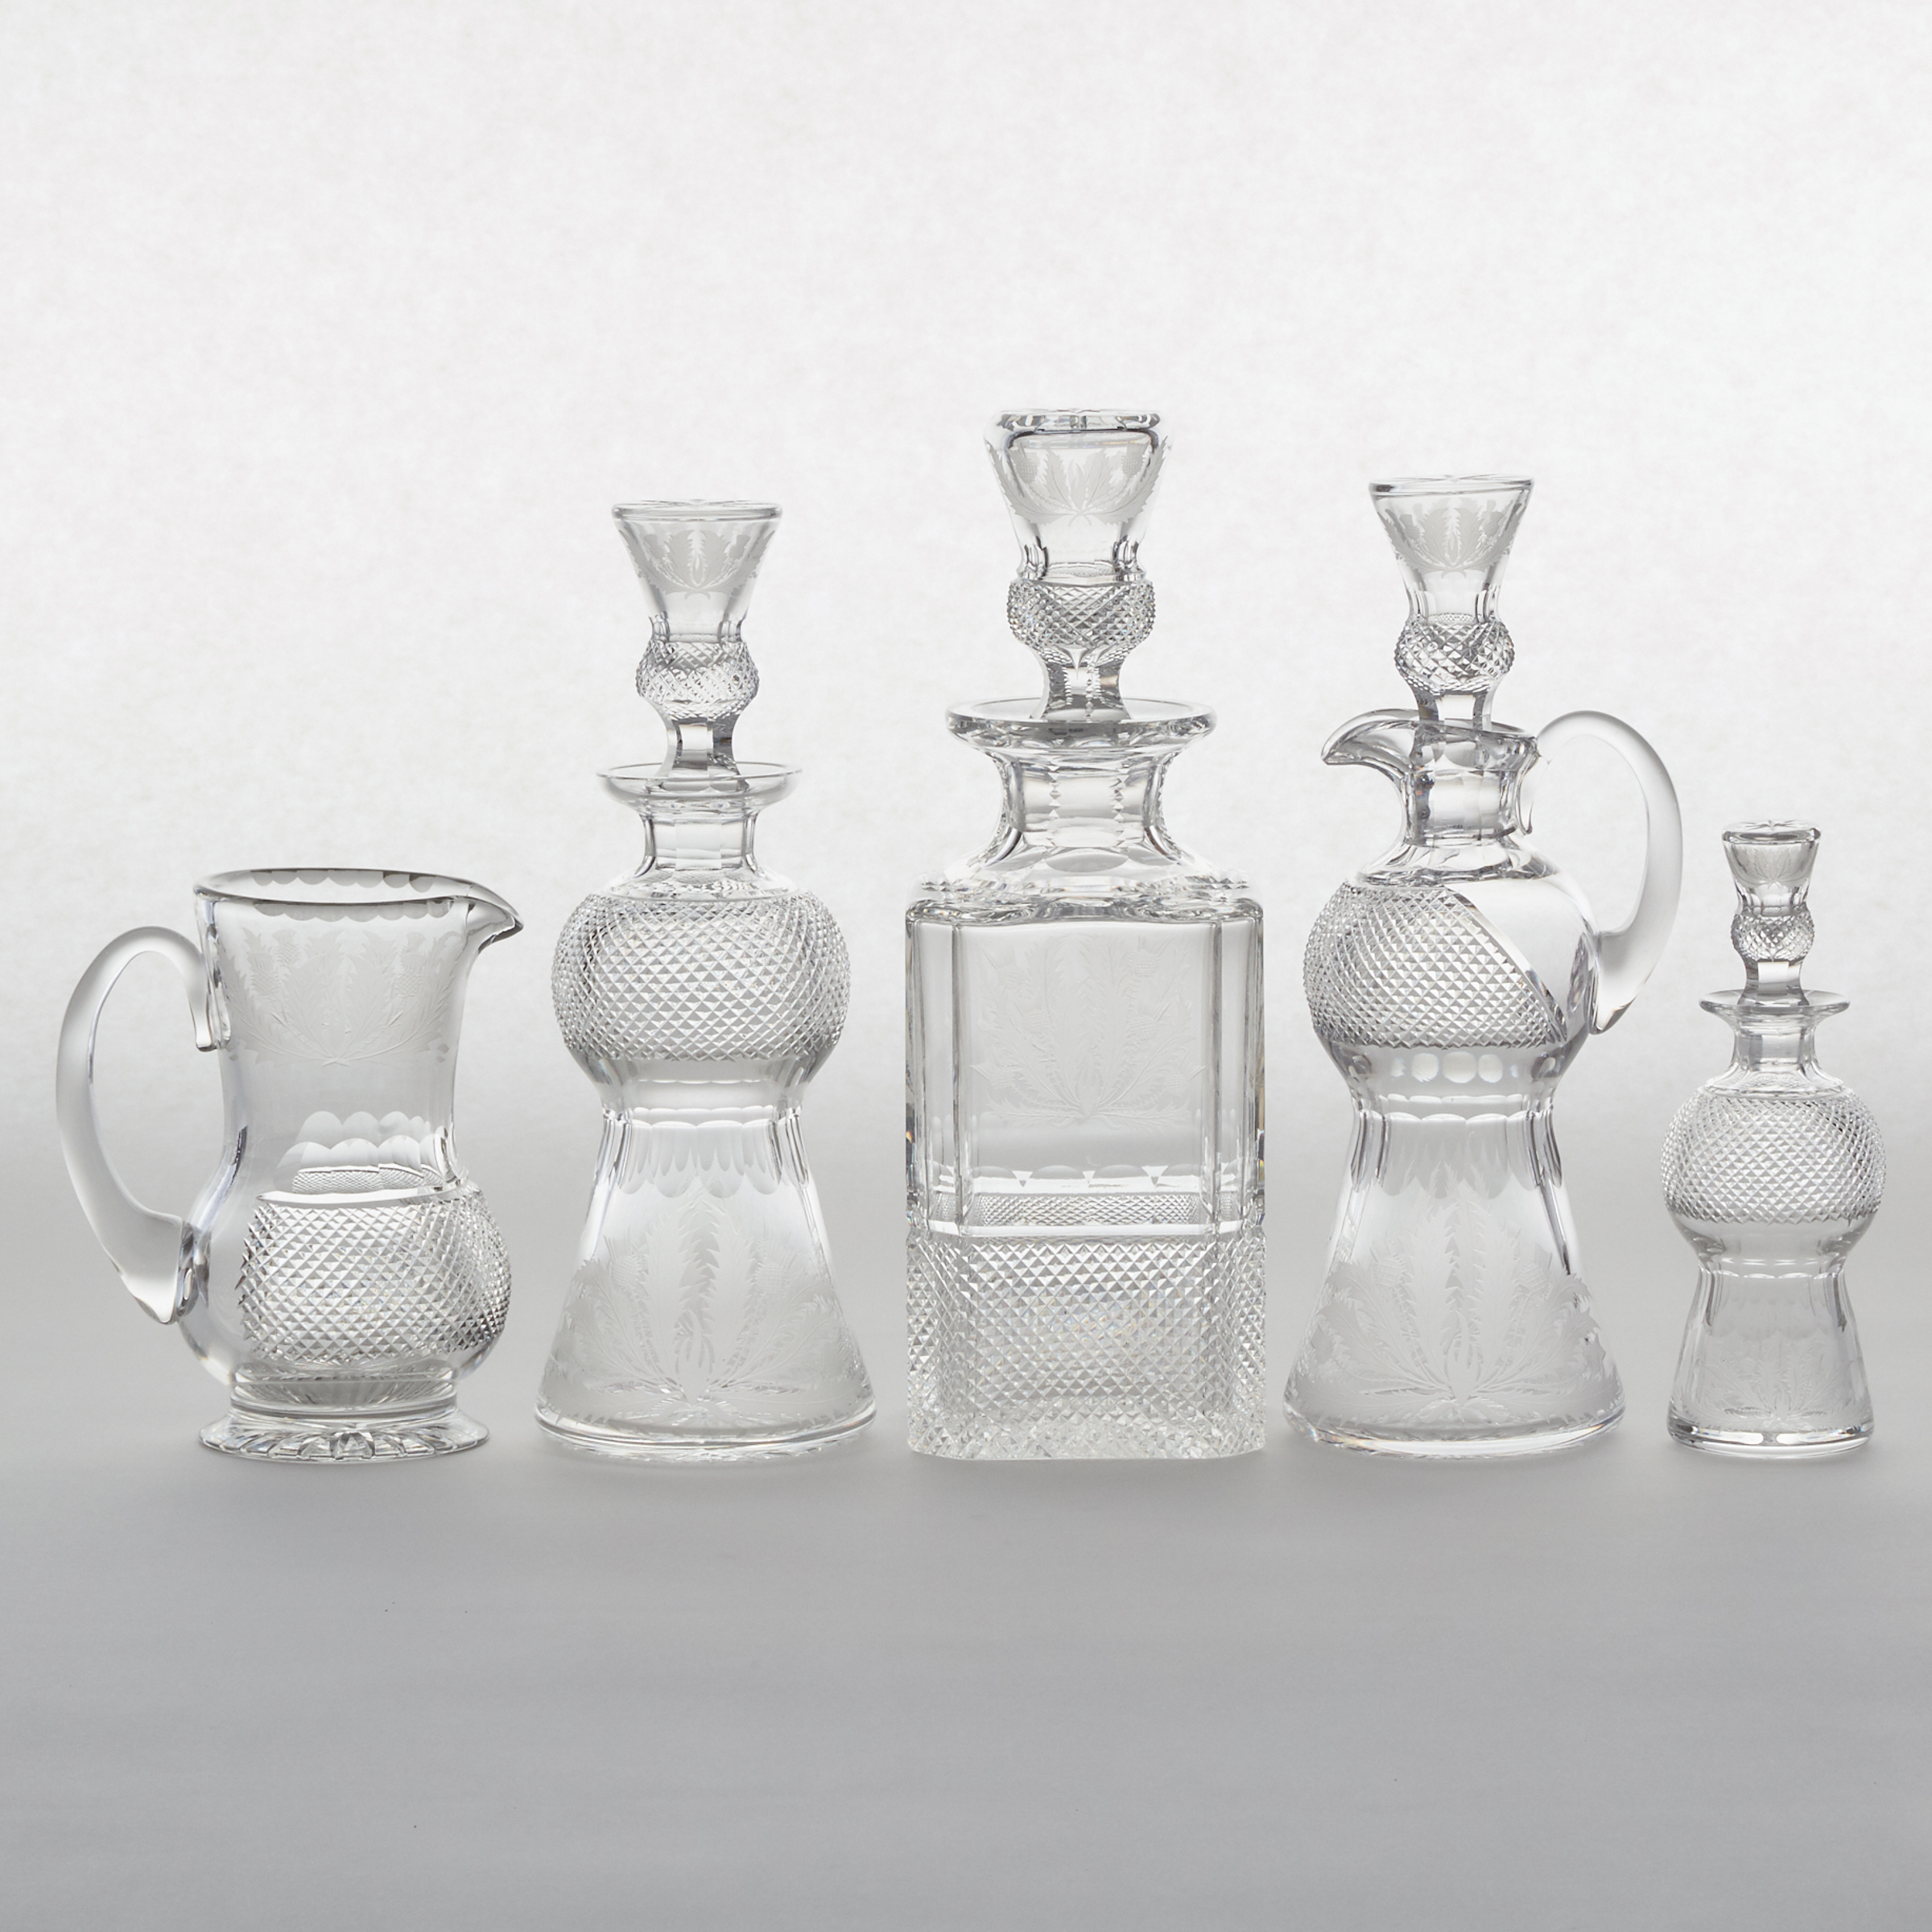 Four Edinburgh Crystal 'Thistle' Pattern Cut Glass Decanters and a Pitcher, 20th century